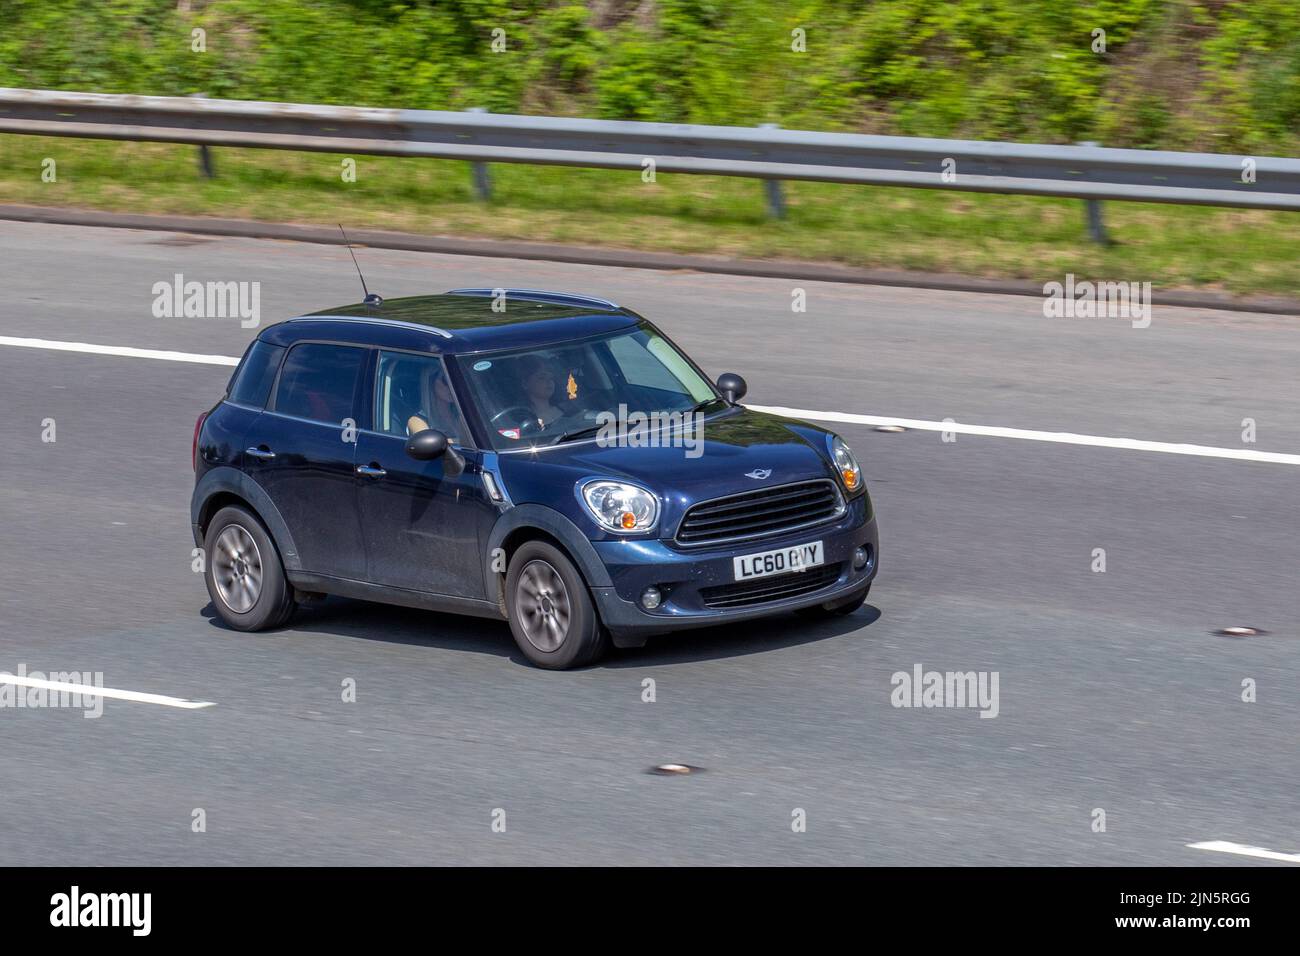 2010 blue MINI COOPER Countryman One D, DT 90 Start Stop Diesel SUV 1598cc 6-speed manual; travelling on the M6 Motorway, UK Stock Photo